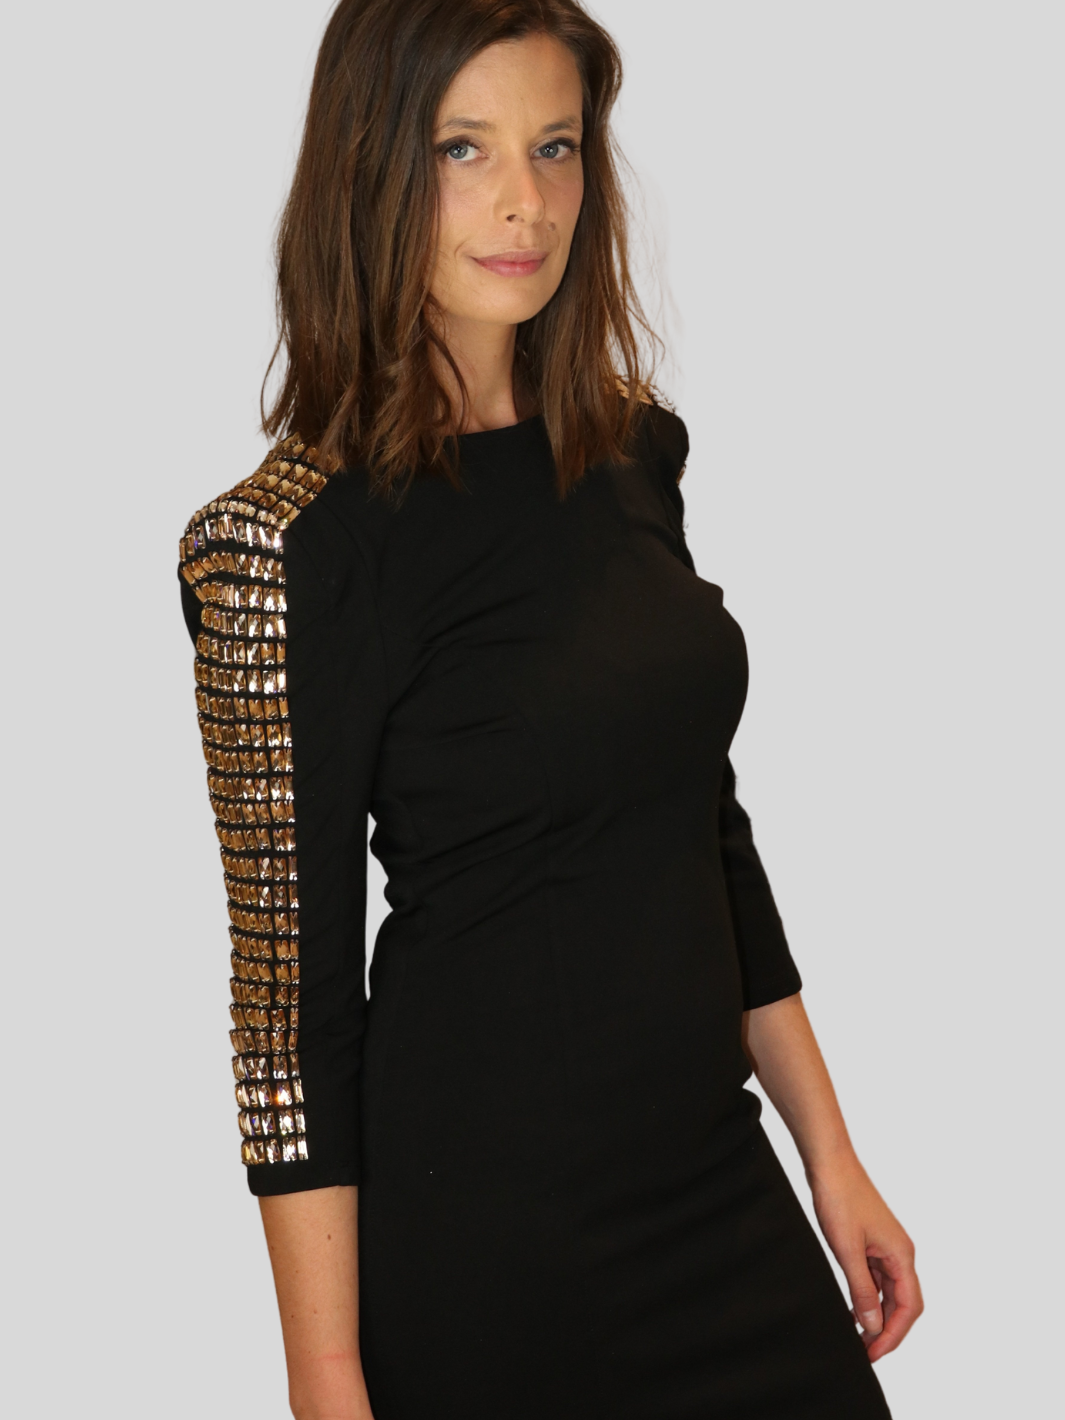 4ever Stunning Deluxe Premium black midi dress with gold rhinestone jeweled arms and chunky gold back zip fastening. Model stands to the side with her rihnestone jeweled sleeve visible. Model turns her head so that she is looking directly into the camera.